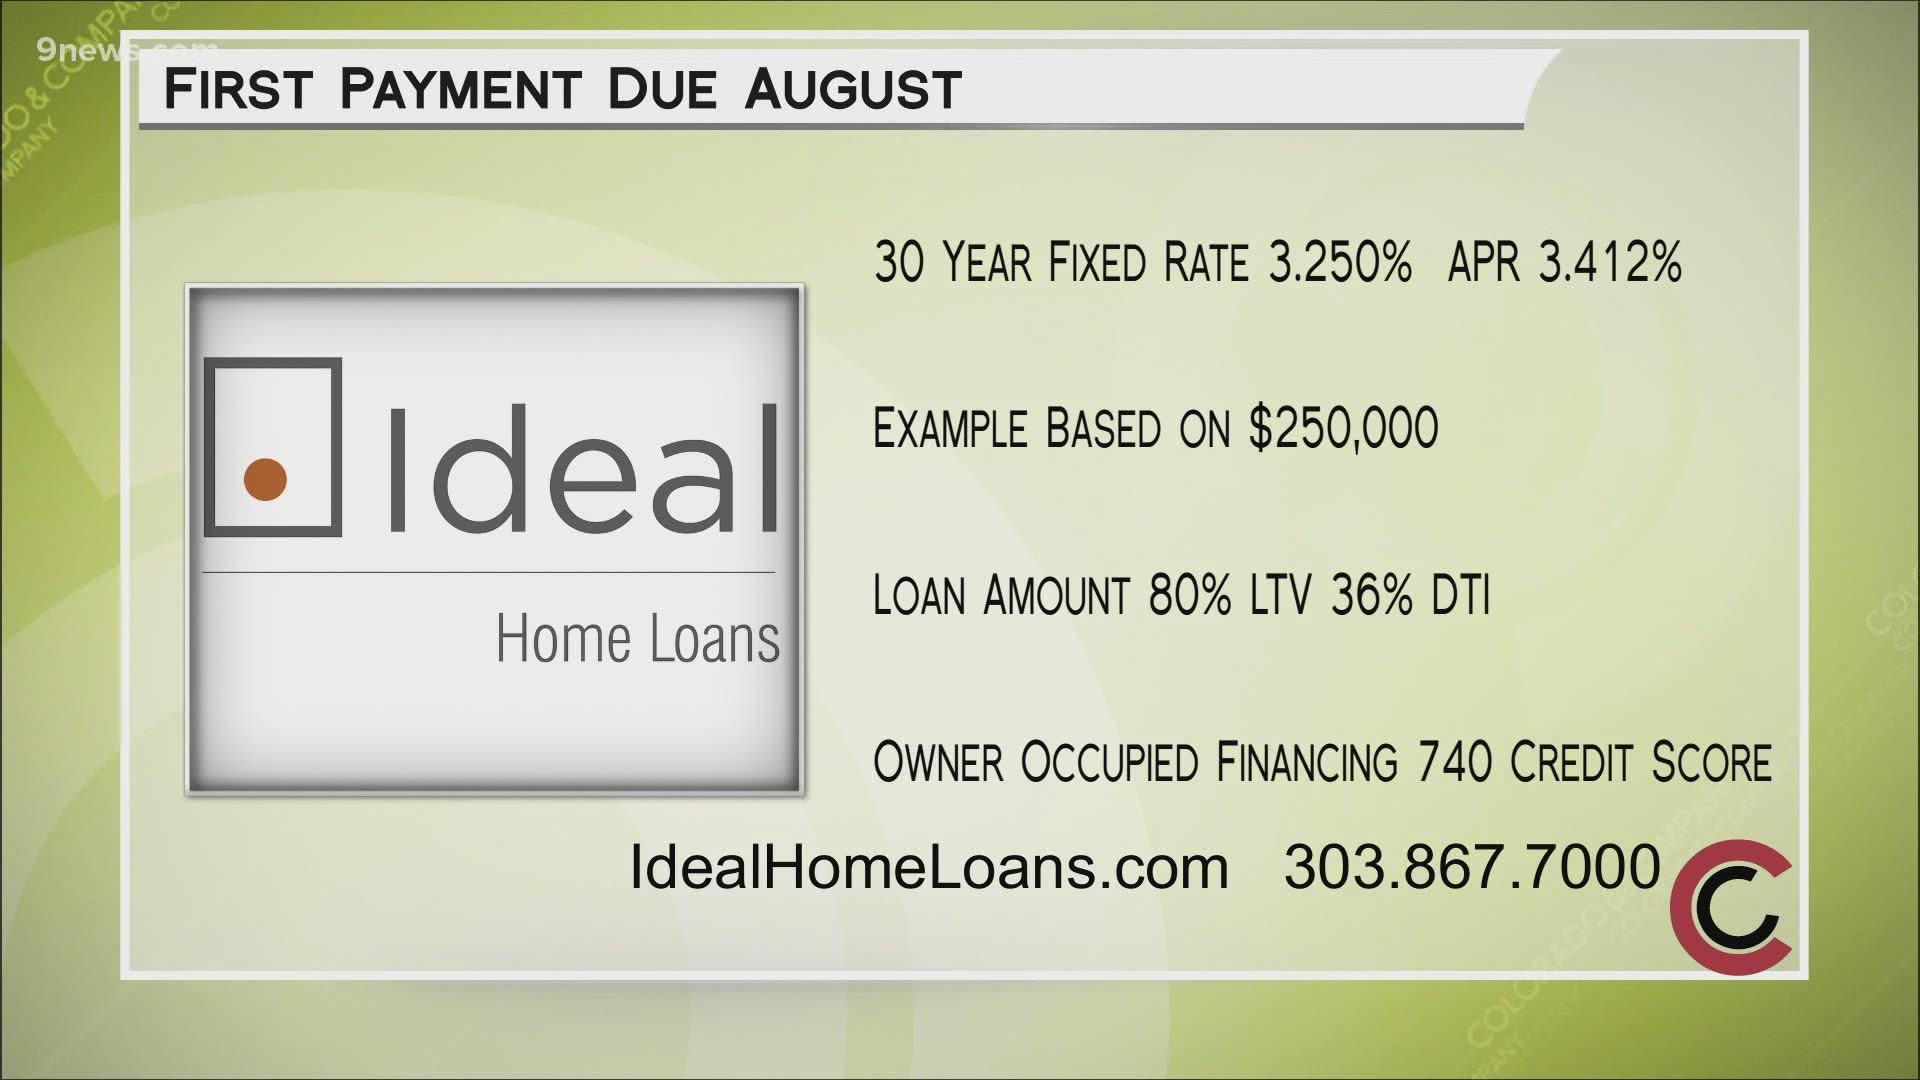 Get started with a free home mortgage consultation at IdealHomeLoans.com or by calling 303.867.7000. Your new payment won't be due until August!